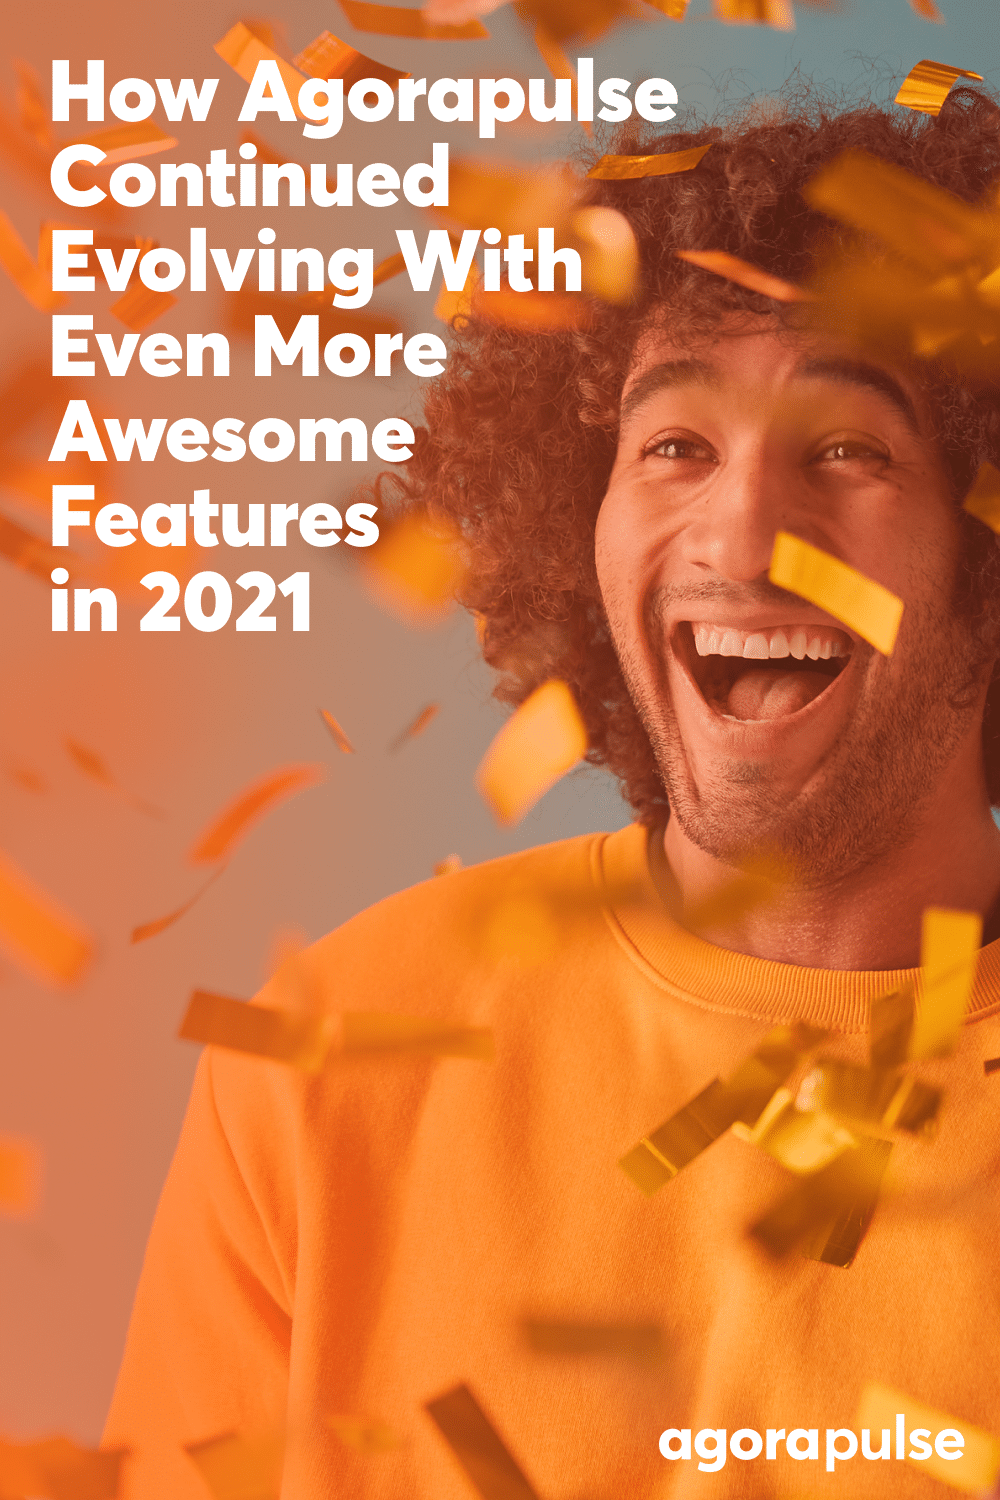 How Agorapulse Continued Evolving With Even More Awesome Features in 2021